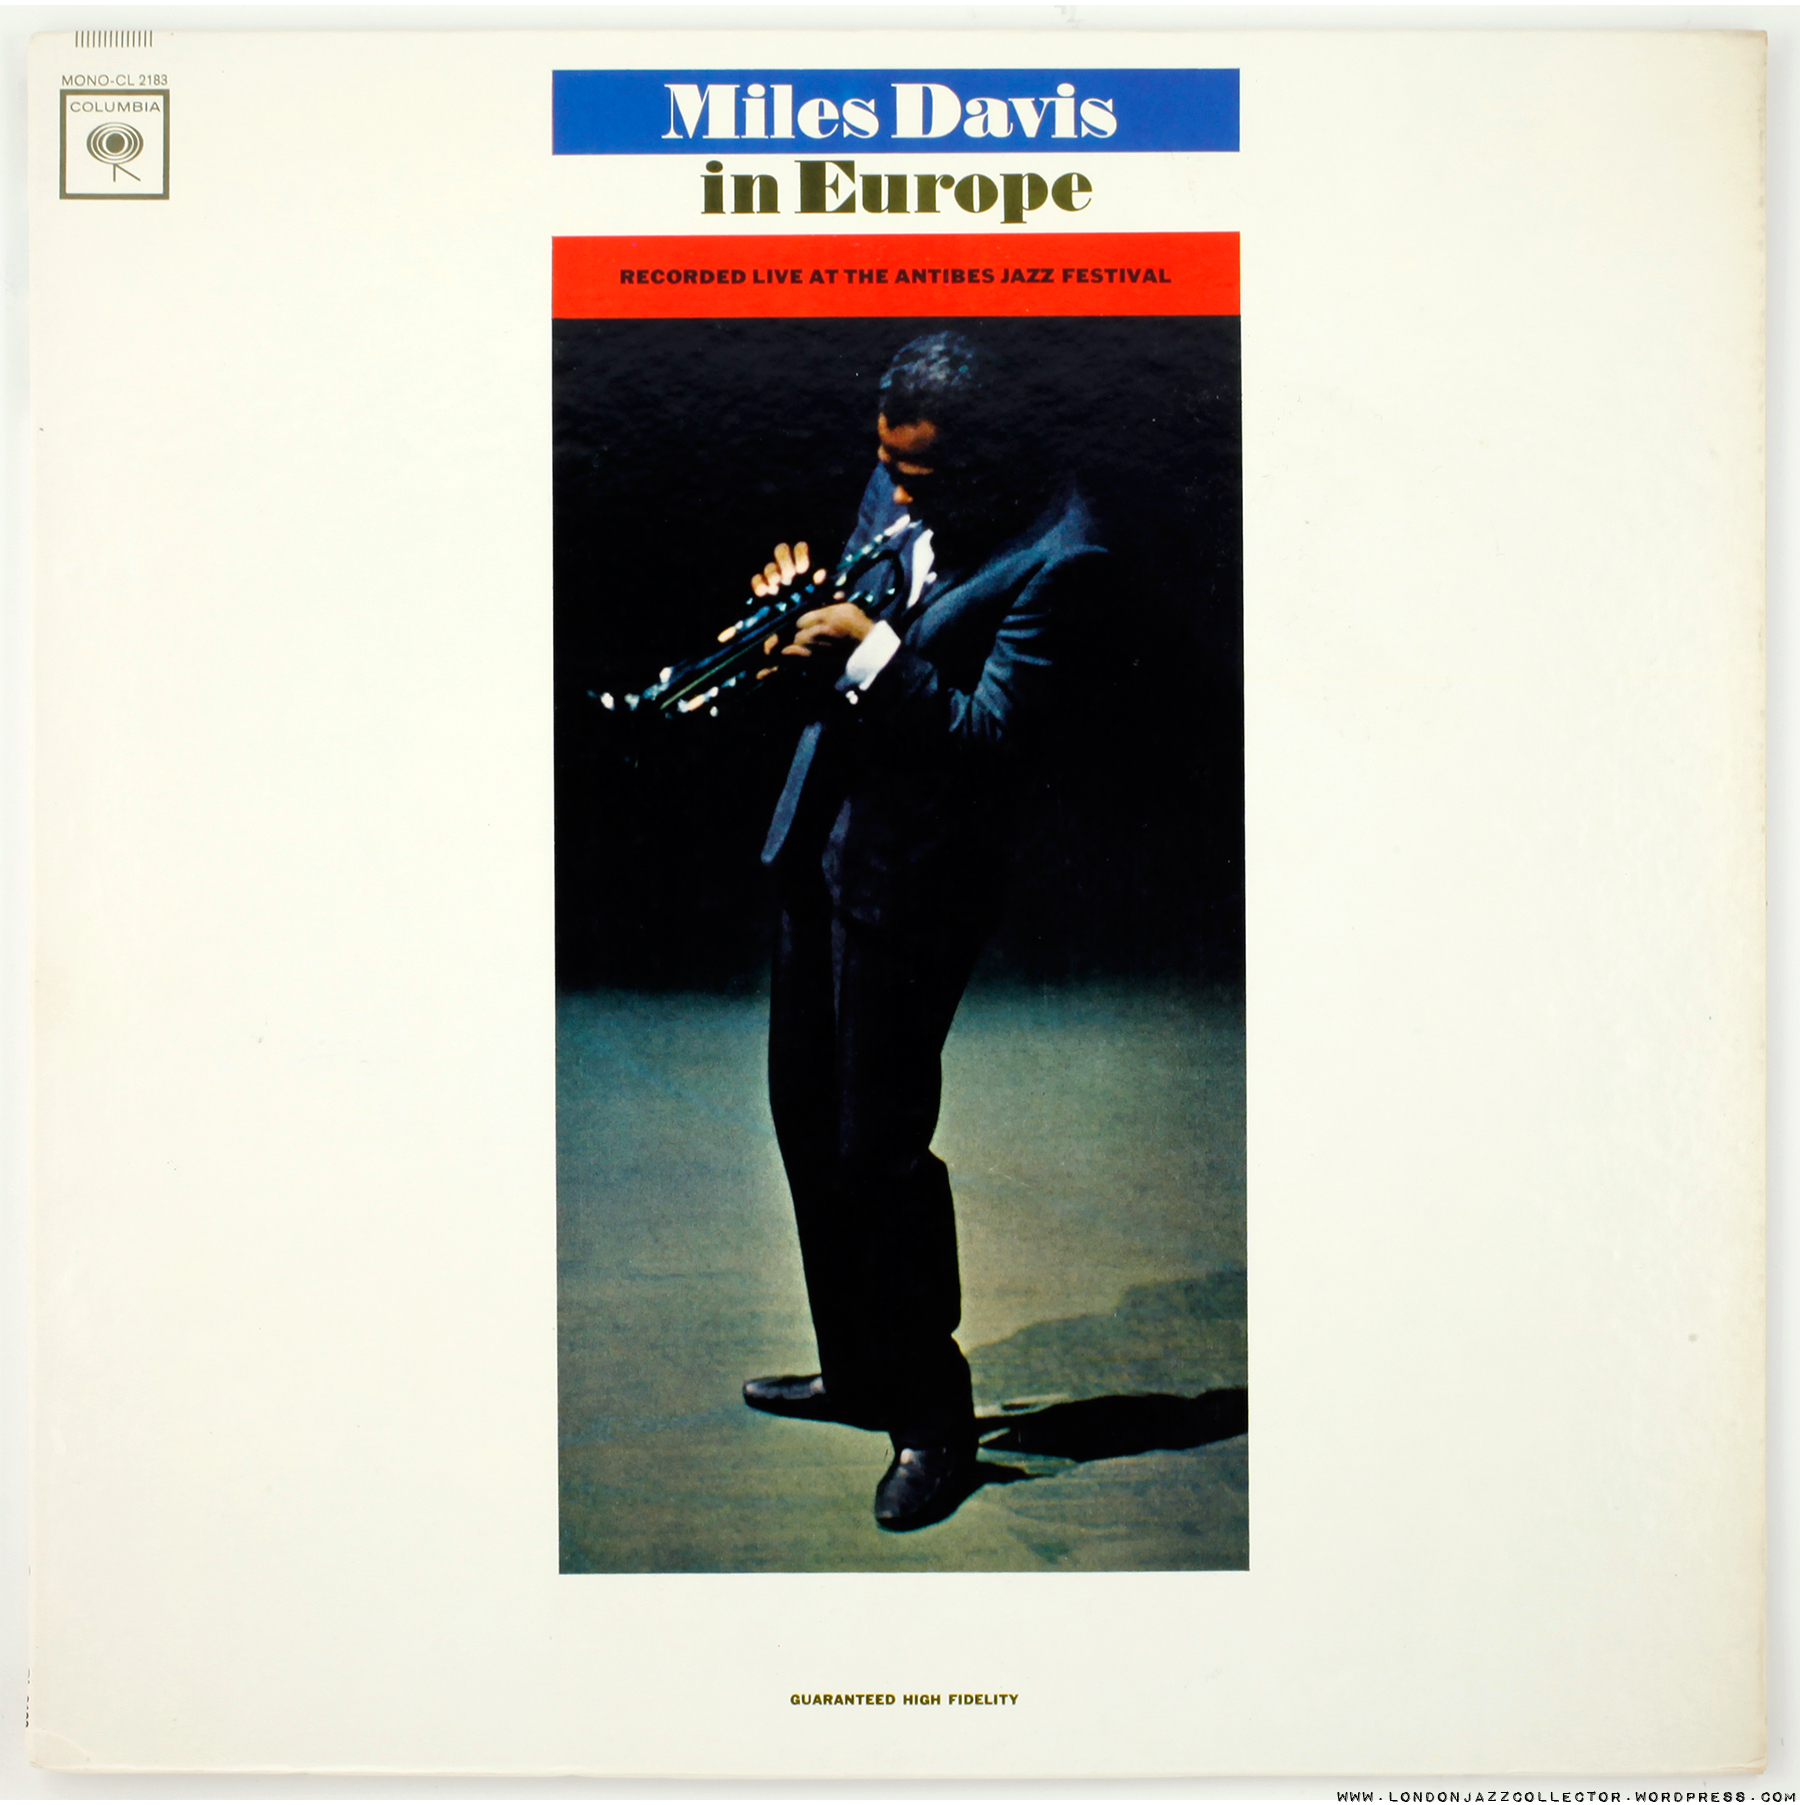 miles-europe-front-cover-1800-ljc.jpg